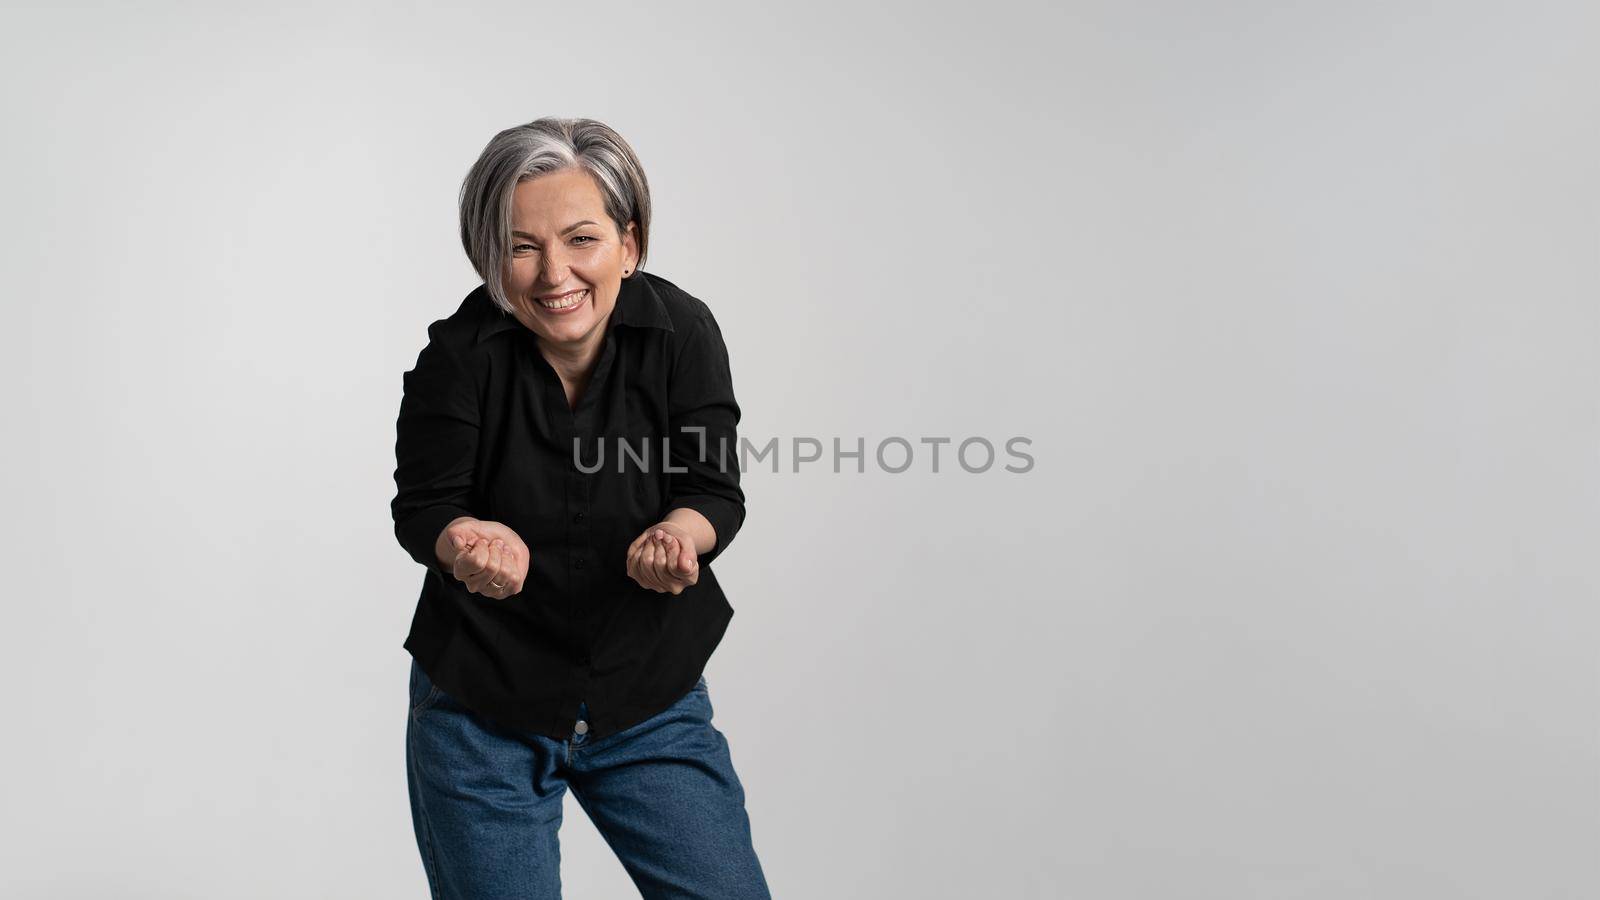 Happy to see her grand kids bowed and hands stretched forward grey haired mature woman wearing black shirt isolated on grey background. Human emotions, facial expression concept.